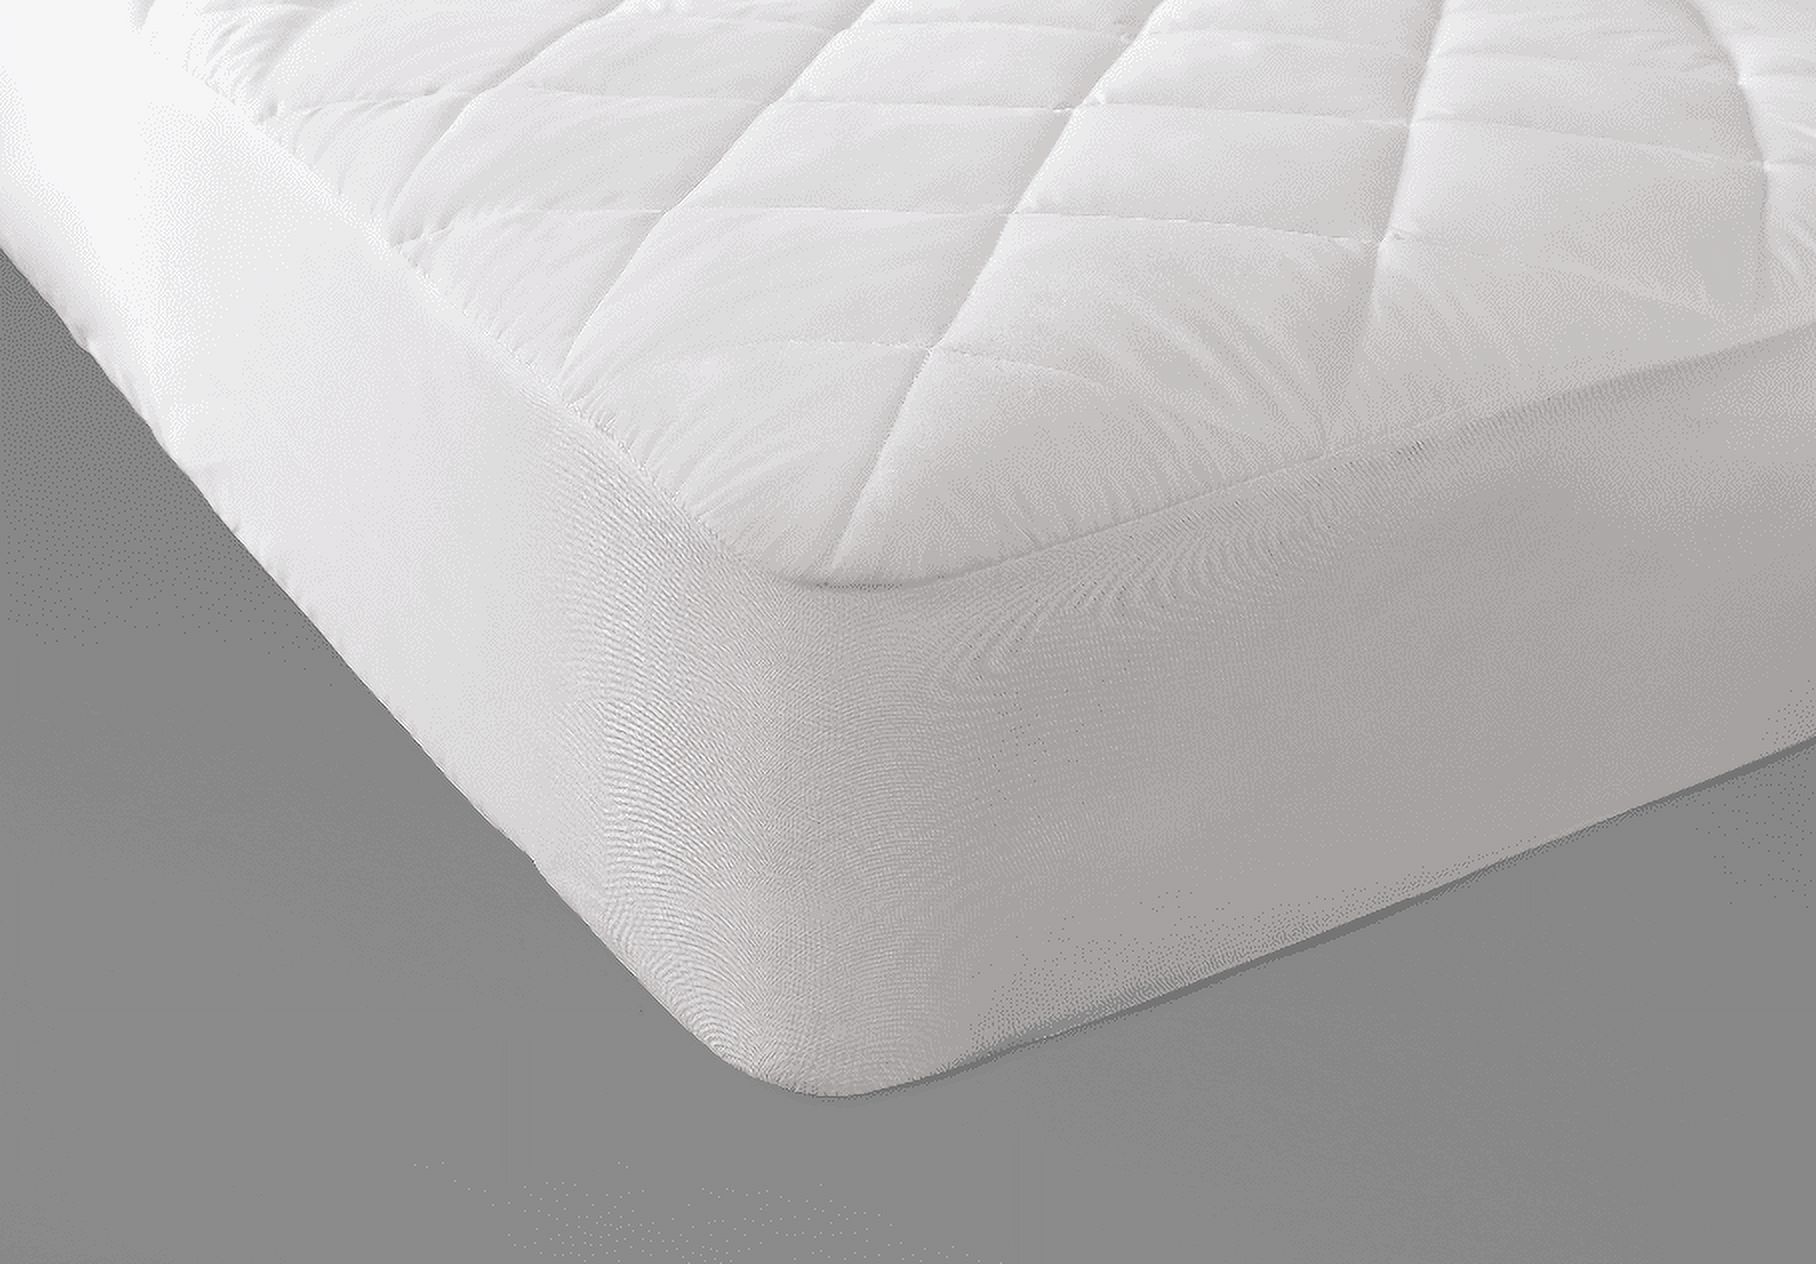 80% off Mainstays Holiday Bundle- Includes Standard Pillow and Twin-XL Mattress Pad - image 3 of 5